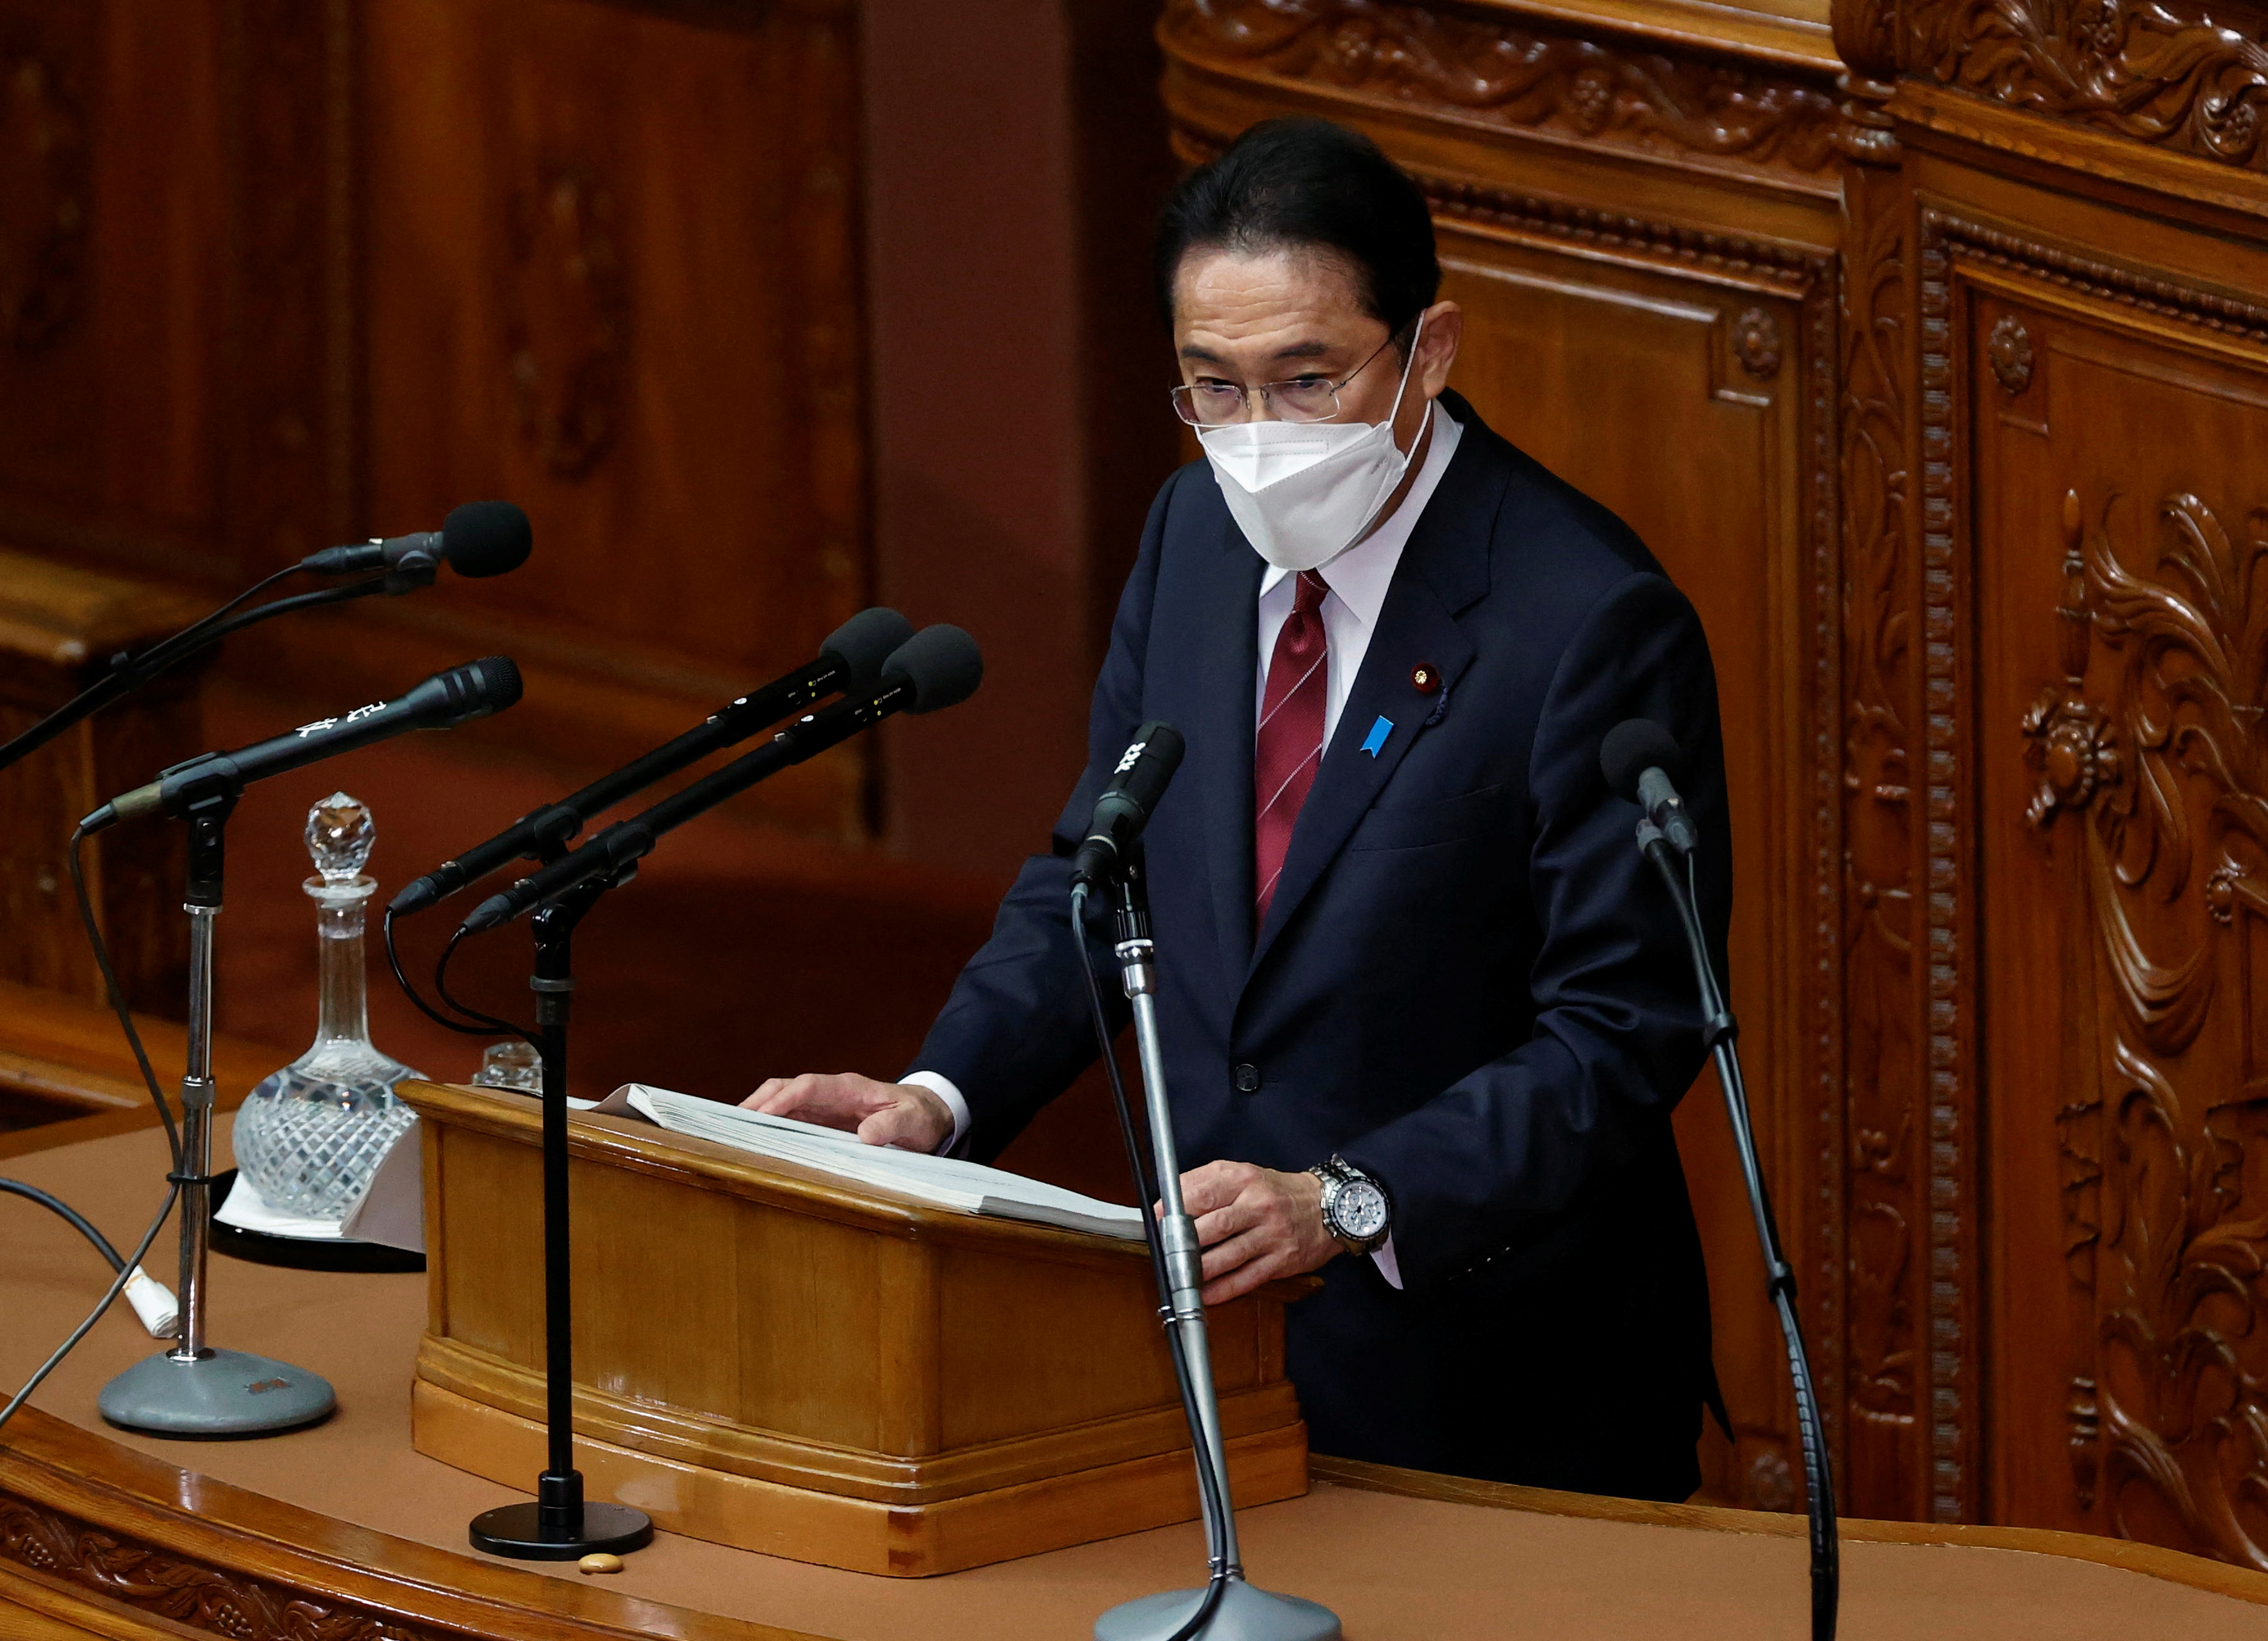 Japan's Prime Minister Fumio Kishida attends the opening of an extraordinary session of parliament in Tokyo